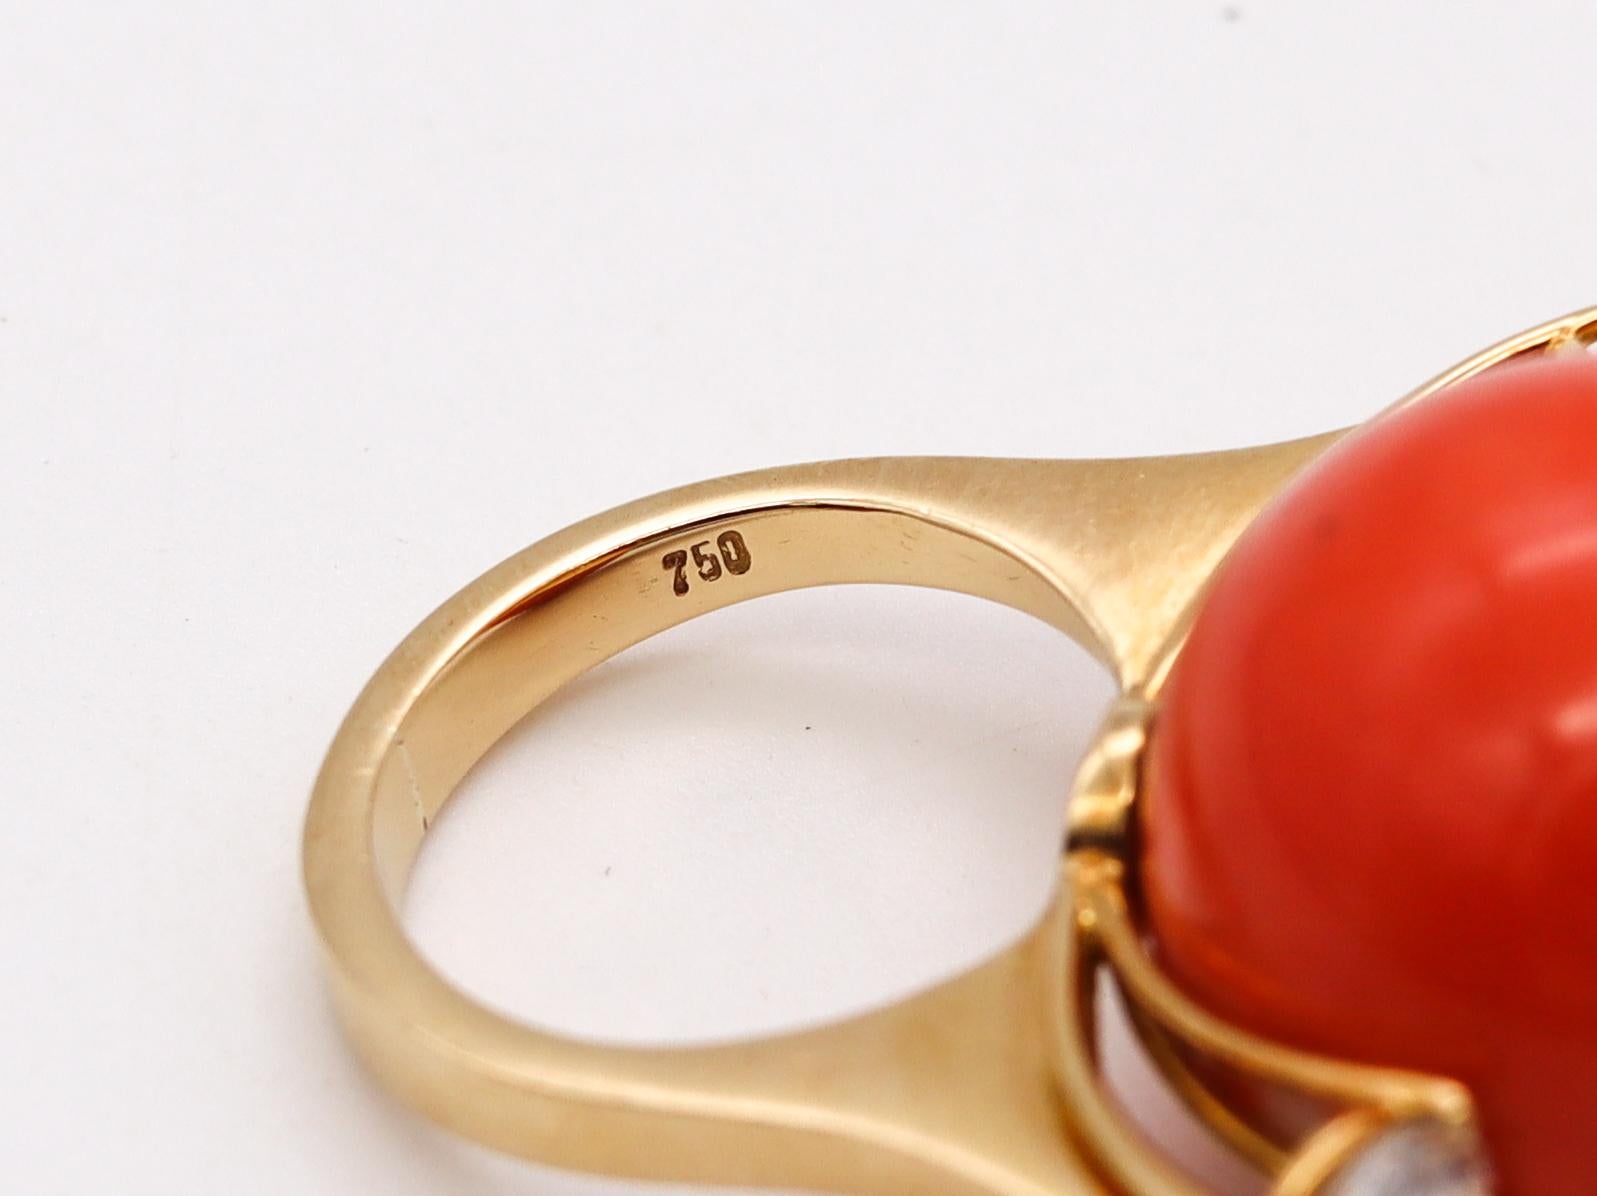 Modernist 1970 Italian Cocktail Ring In 18Kt Gold 27.17 Ctw In Diamonds & Coral In Excellent Condition For Sale In Miami, FL